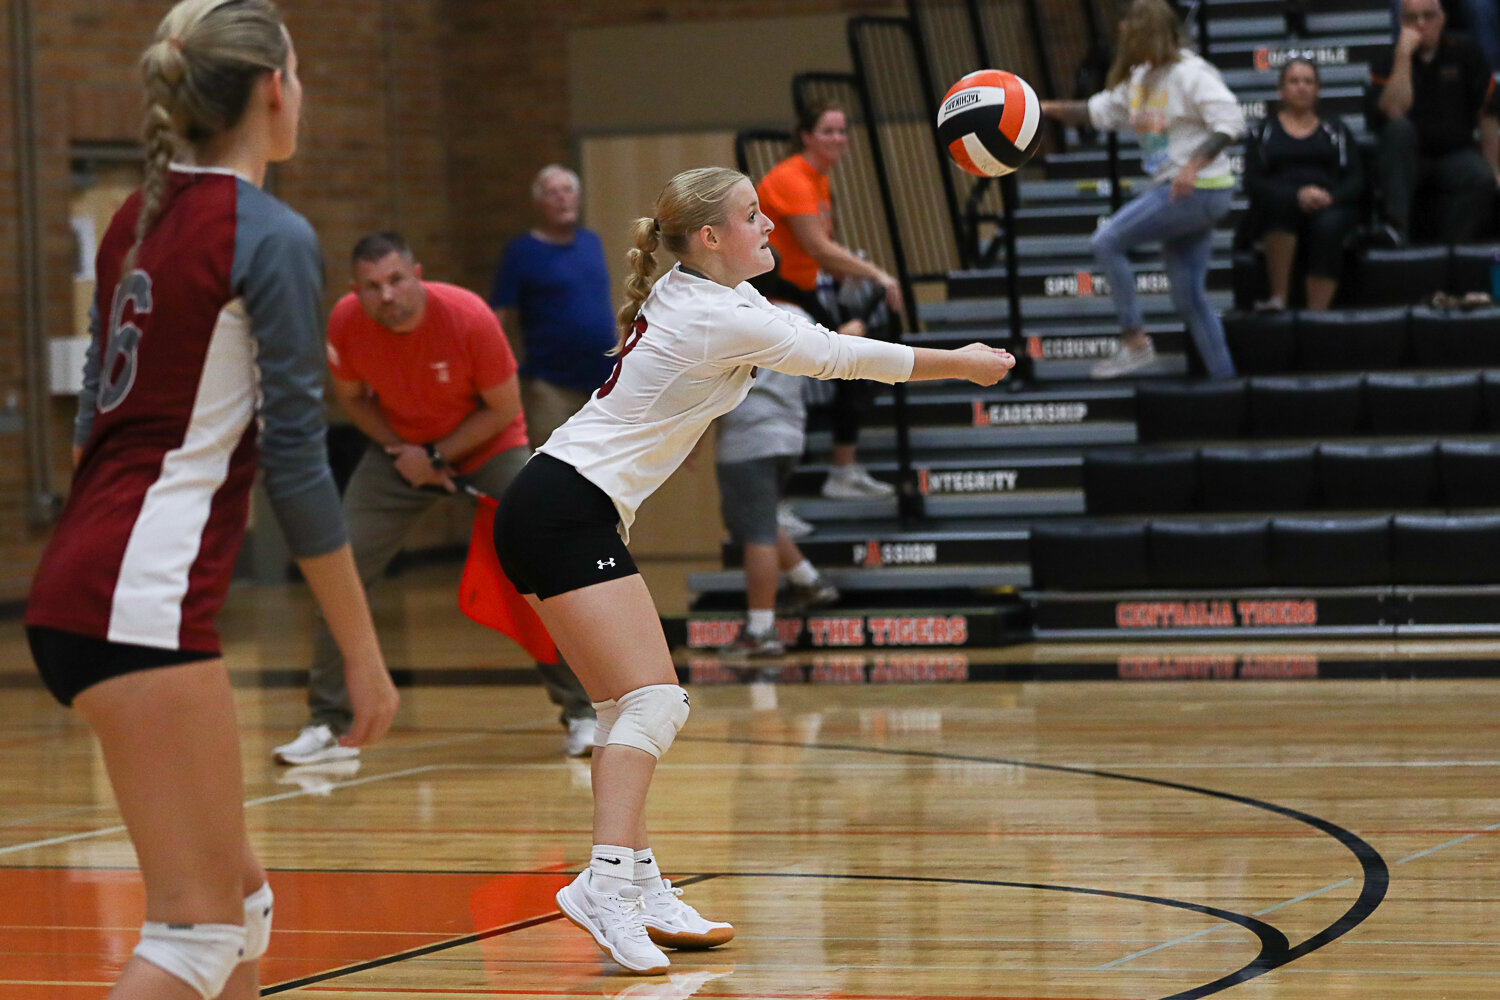 Aubrey Prigmore comes up with a dig during the second set of W.F. West's three-set loss to Centralia on Sept. 21.